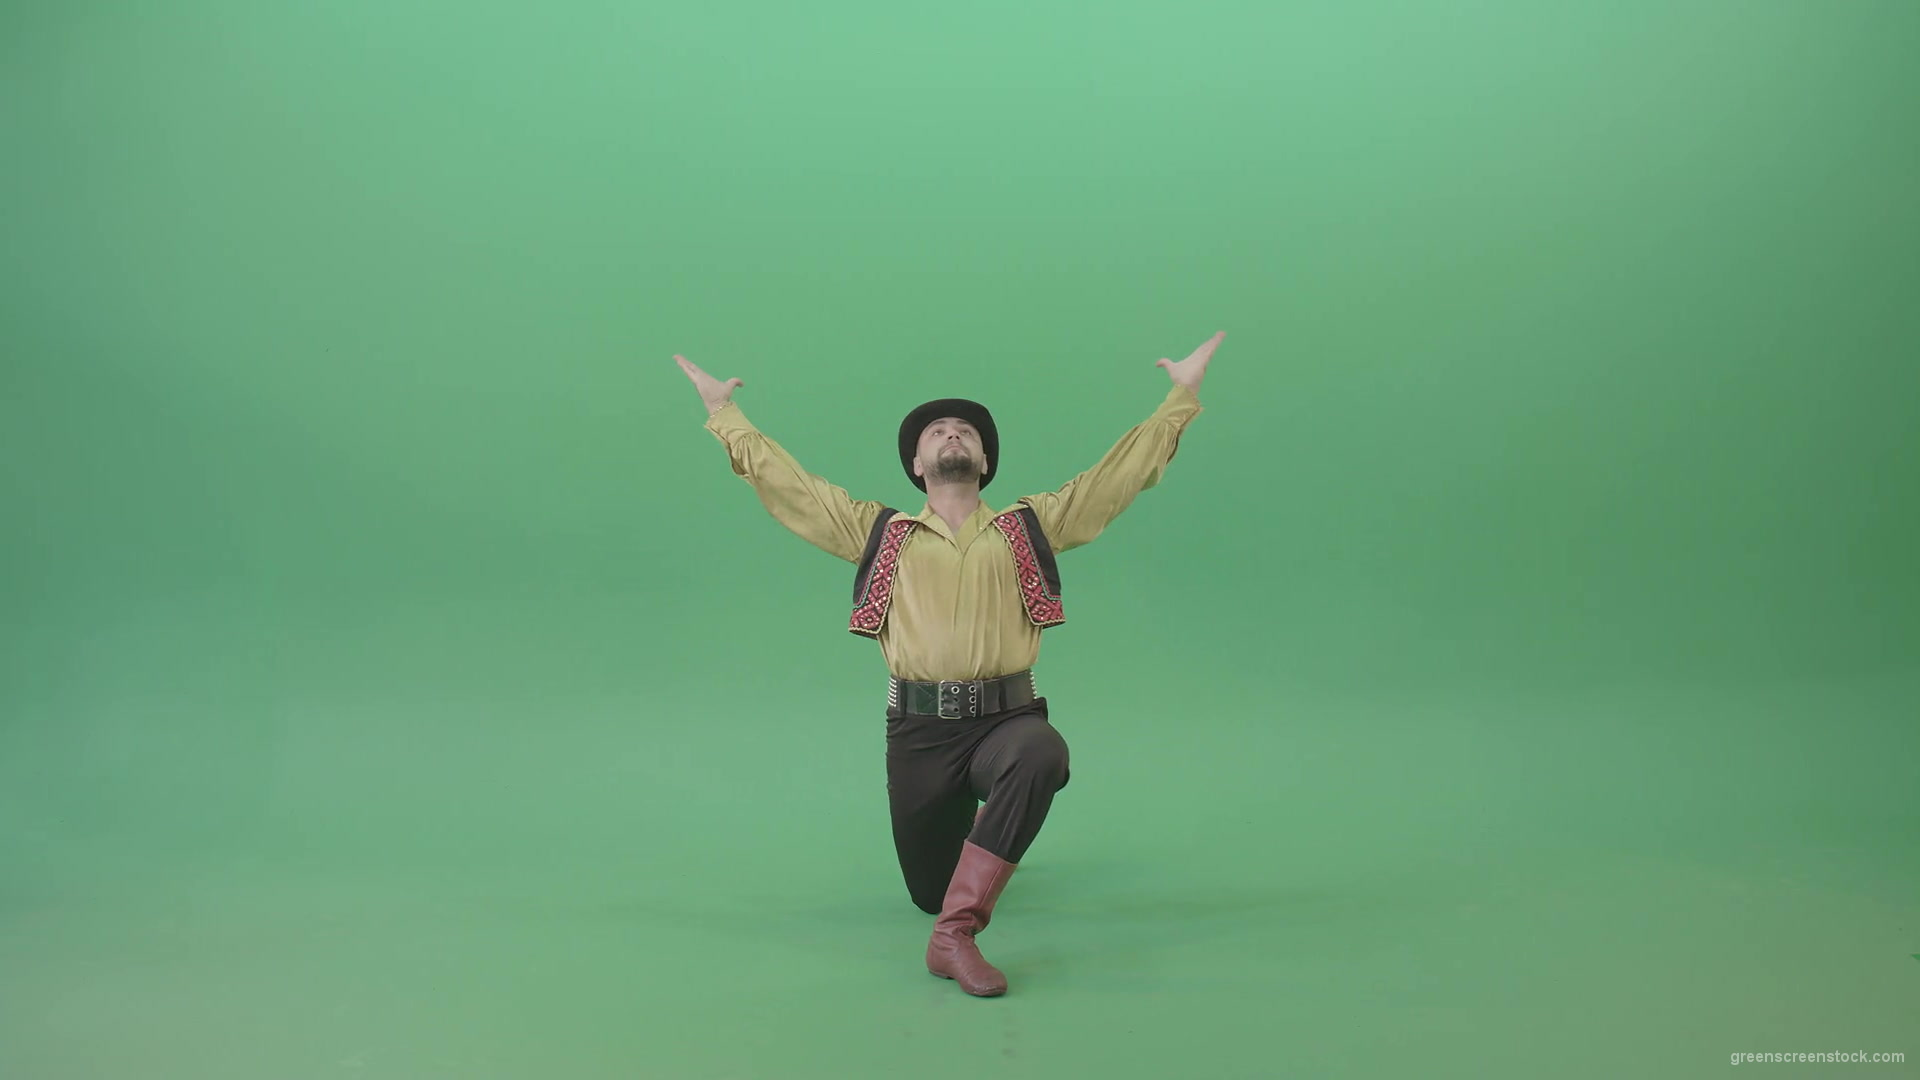 Moldova-man-dancing-with-clapping-isolated-on-Green-Screen-4K-Video-Footage-1920_009 Green Screen Stock